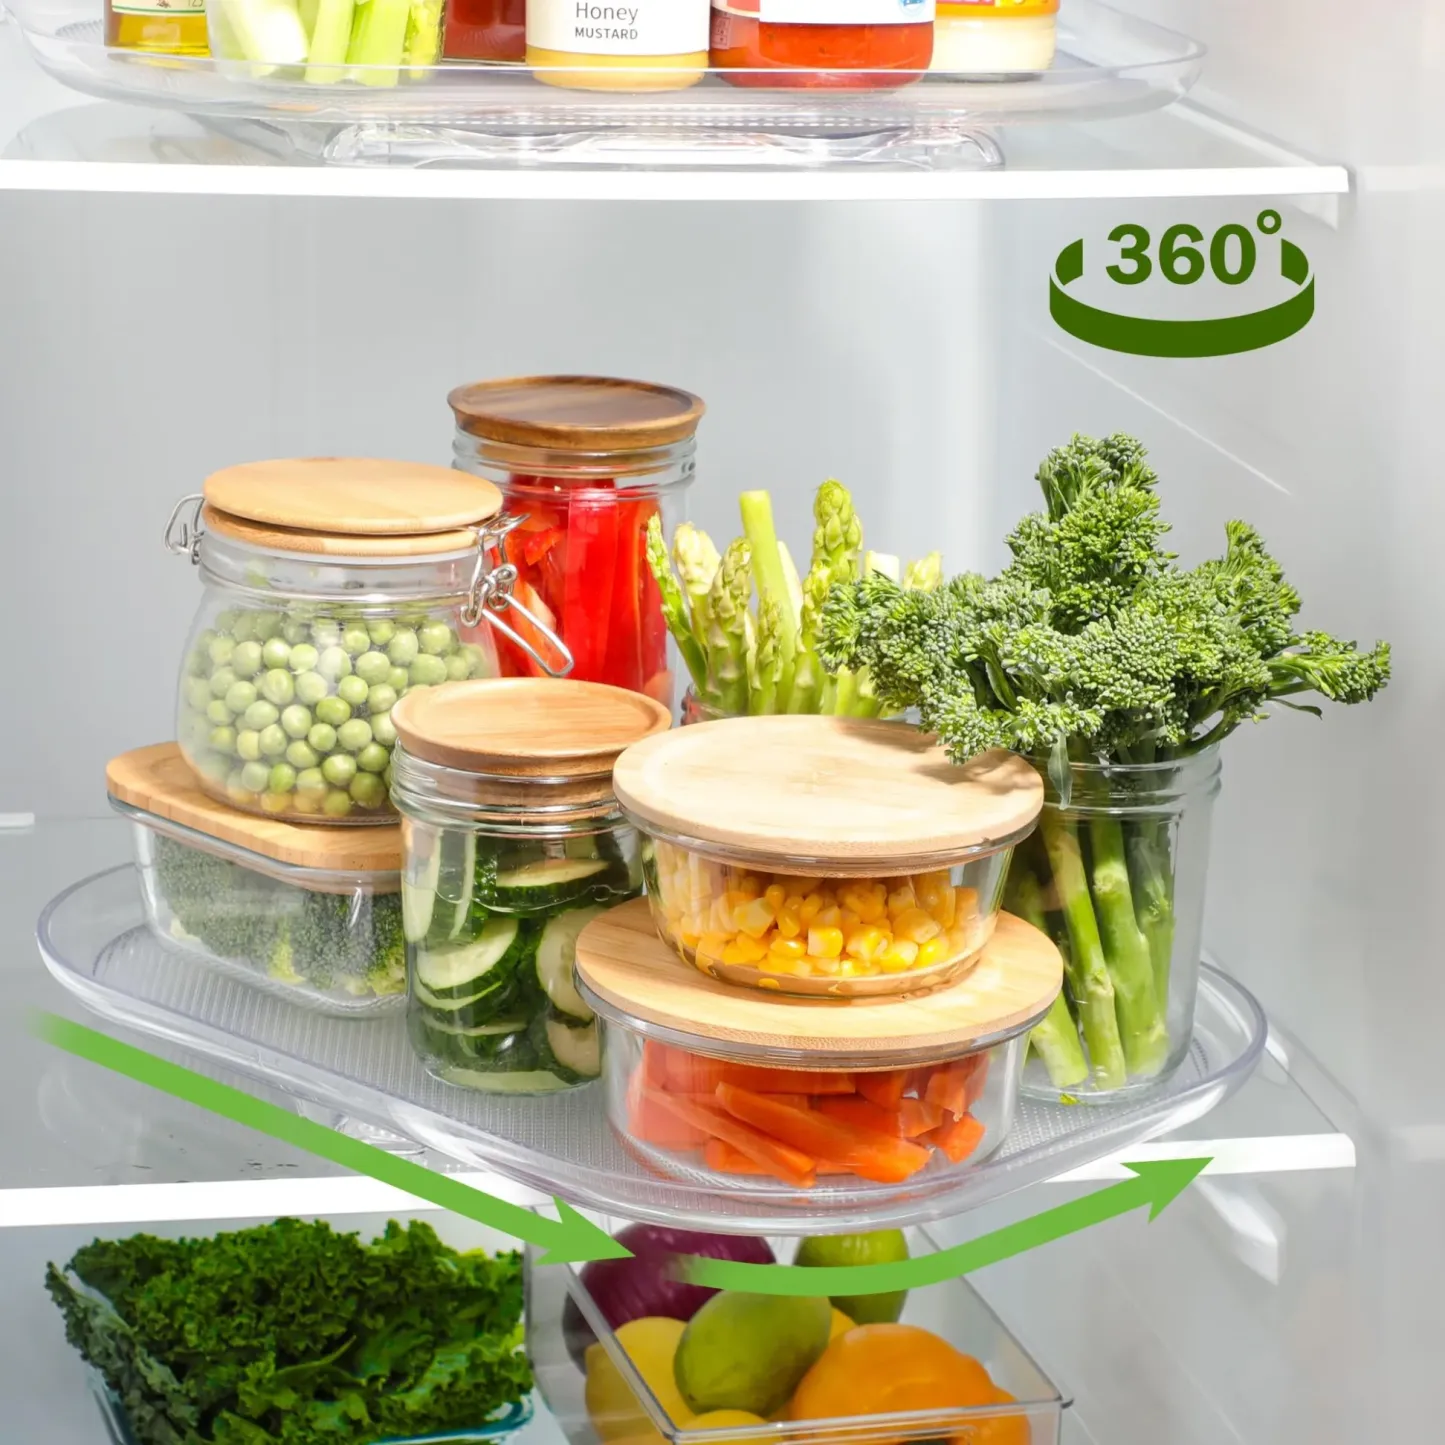 2024 New Lazy Susans Turntable Organizer for Refrigerator-😍BUY 3 GET 10% OFF & FREE SHIPPING